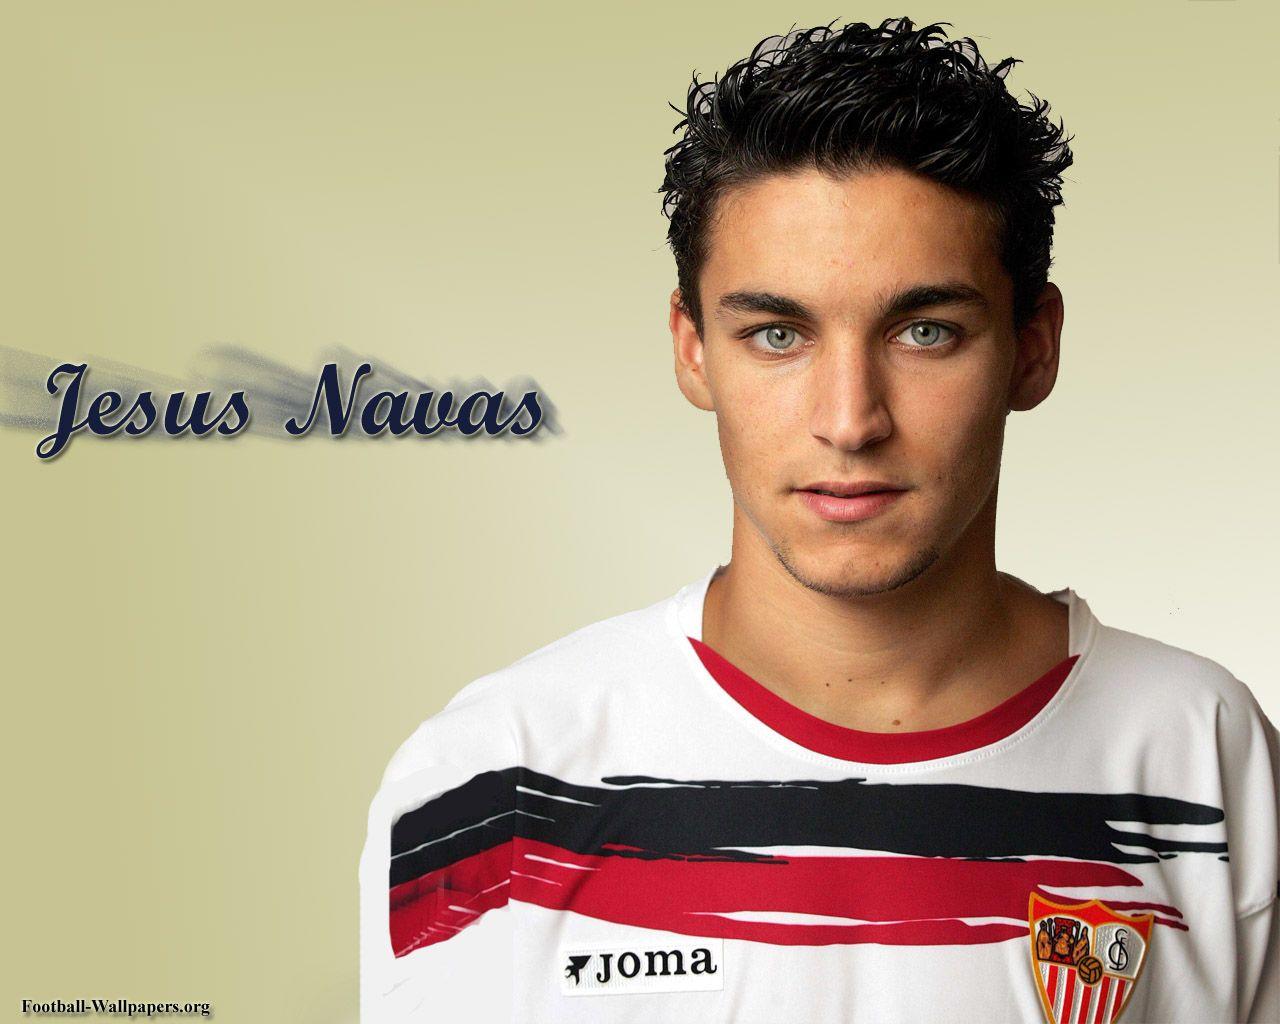 Jesus Navas Football Wallpaper, Background and Picture